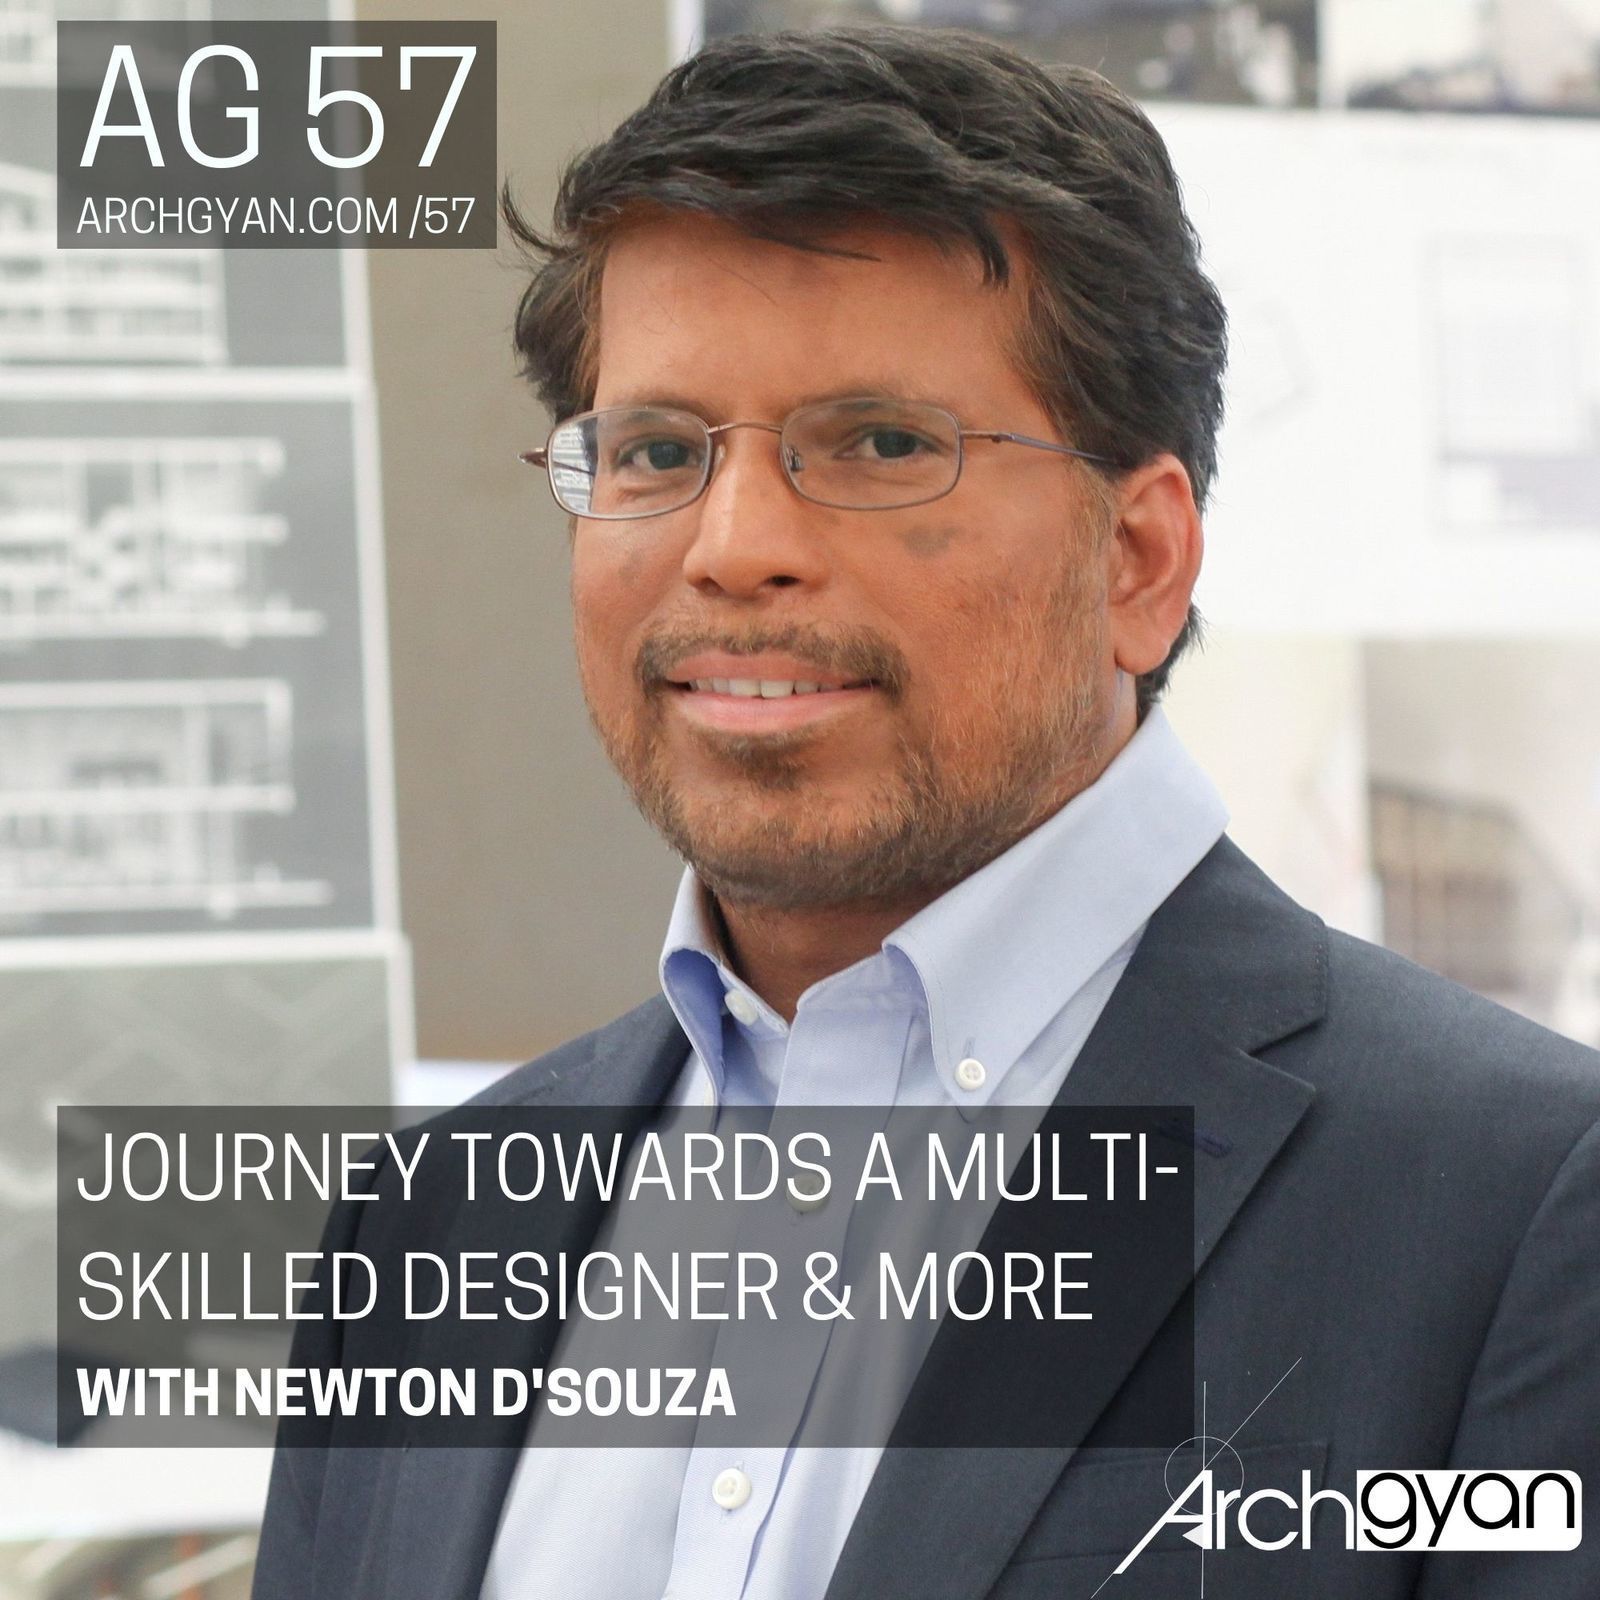 Journey towards a Multi-Skilled Designer & more with Newton D'Souza | AG 57